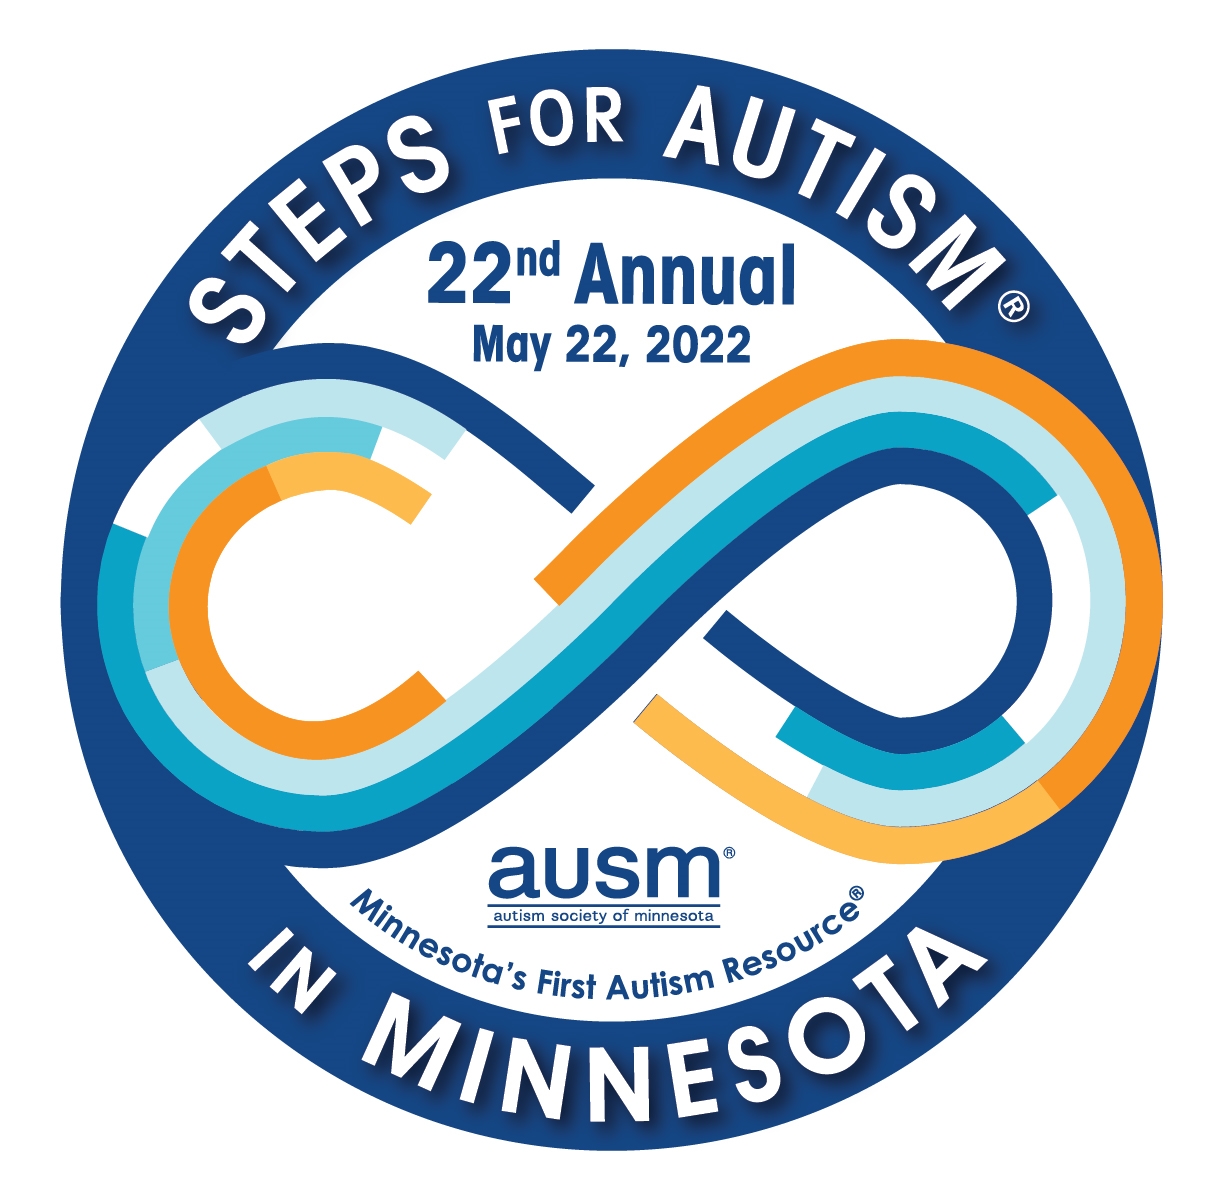 Steps for Autism